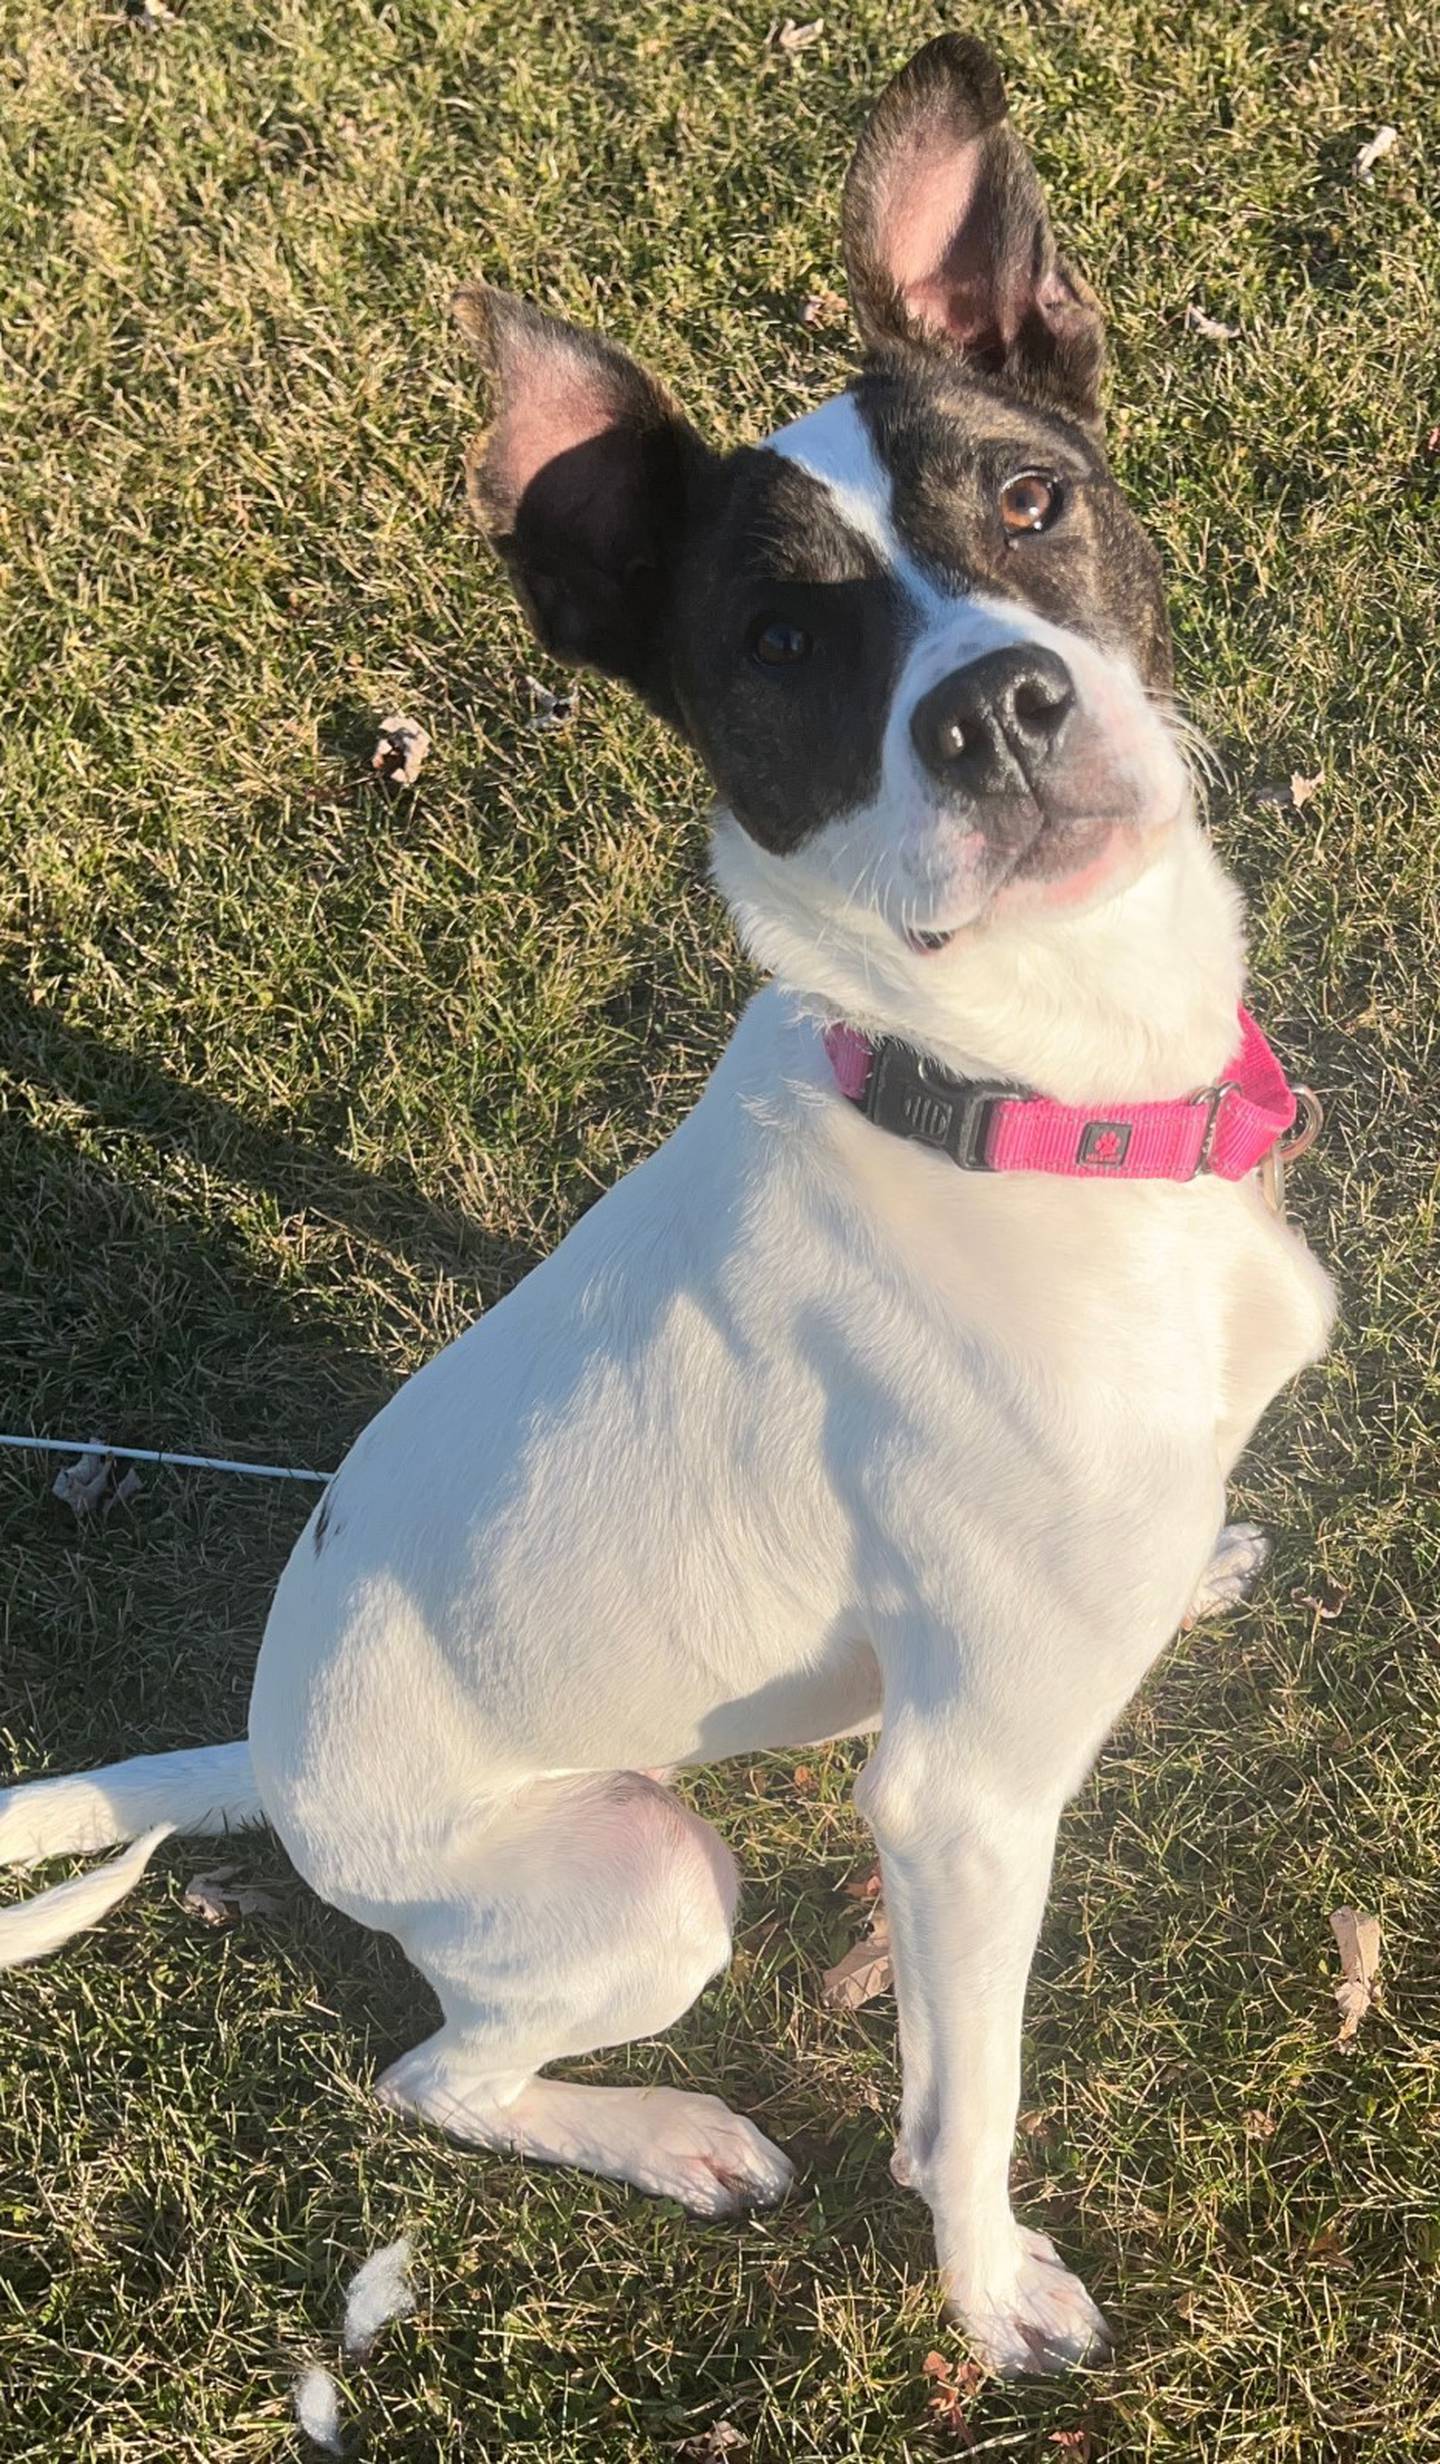 One-year-old Birdie loves to chase tennis balls and bats them around the room like a kitten. She currently weighs about 45 pounds and is full of personality and spunk. To meet Birdie, call Joliet Township Animal Control for details at 815-725-0333.